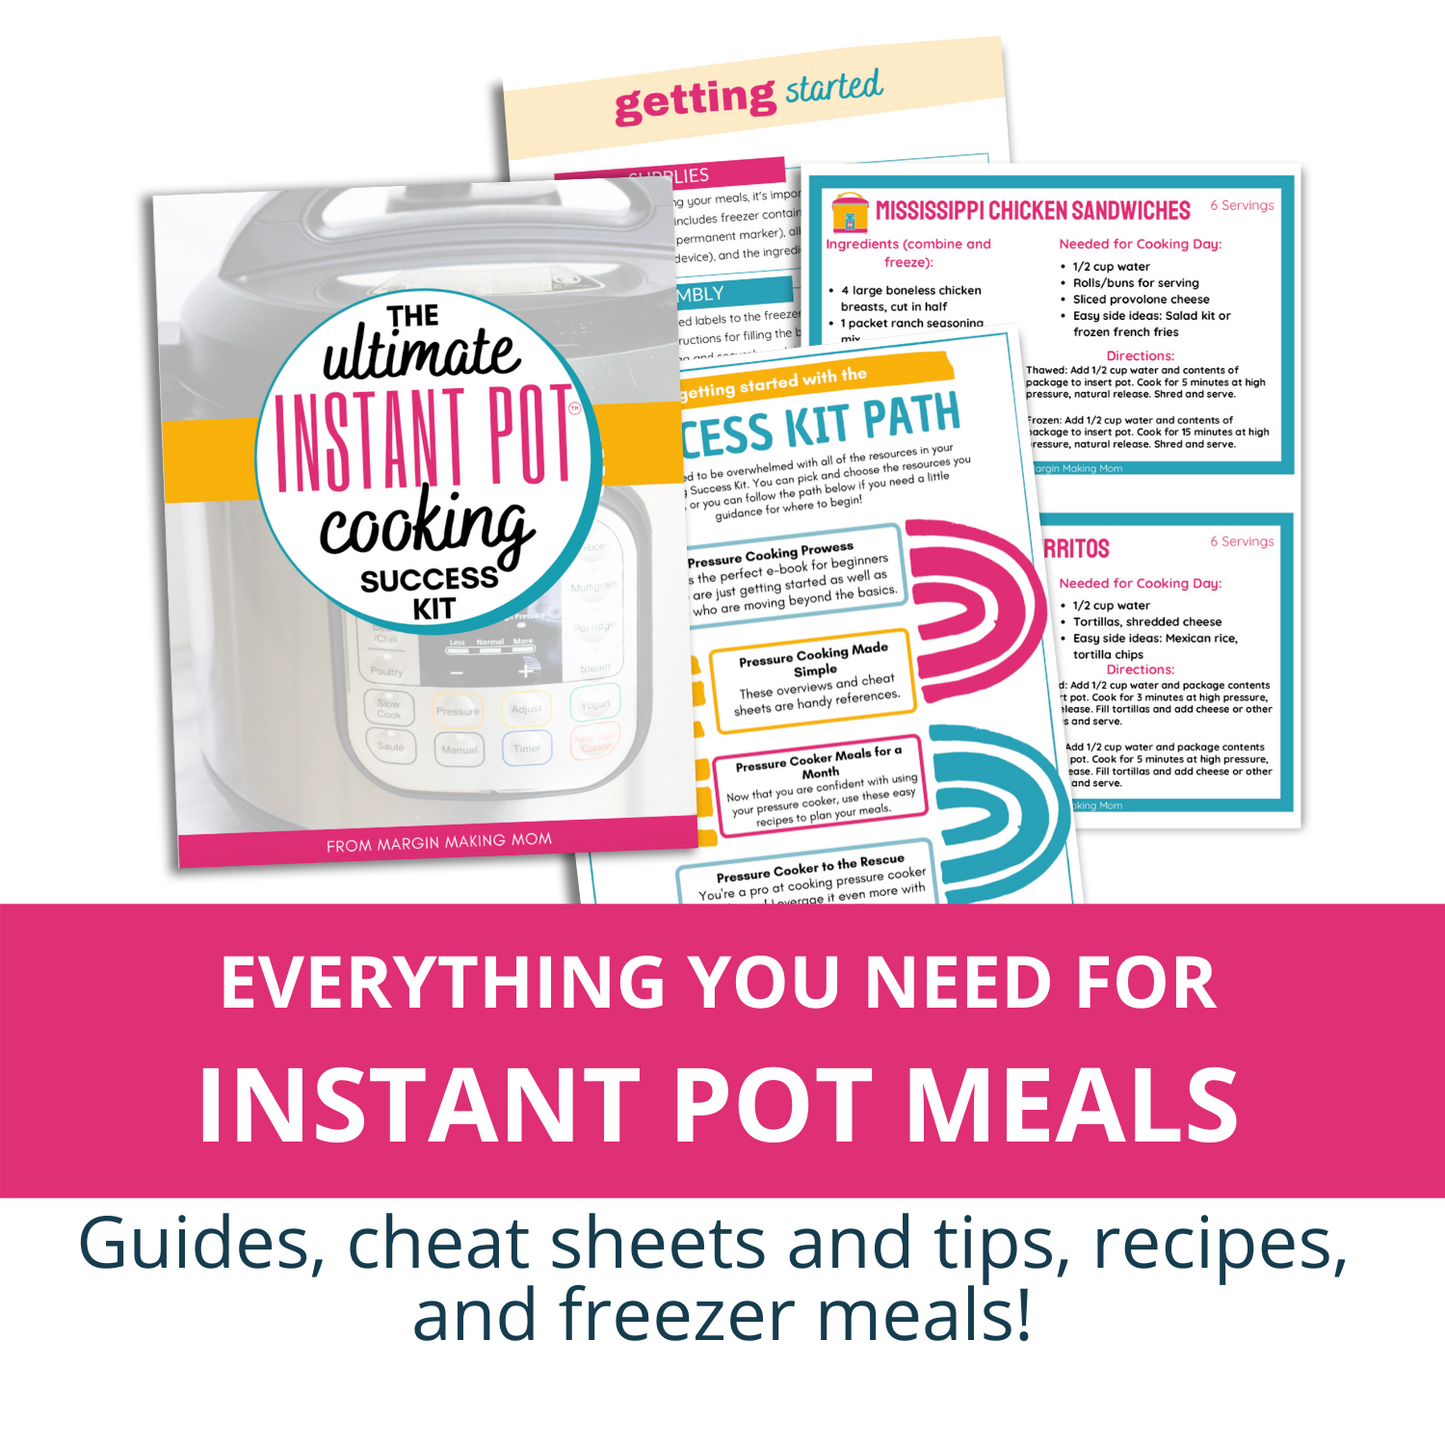 The Ultimate Instant Pot Cooking Success Kit